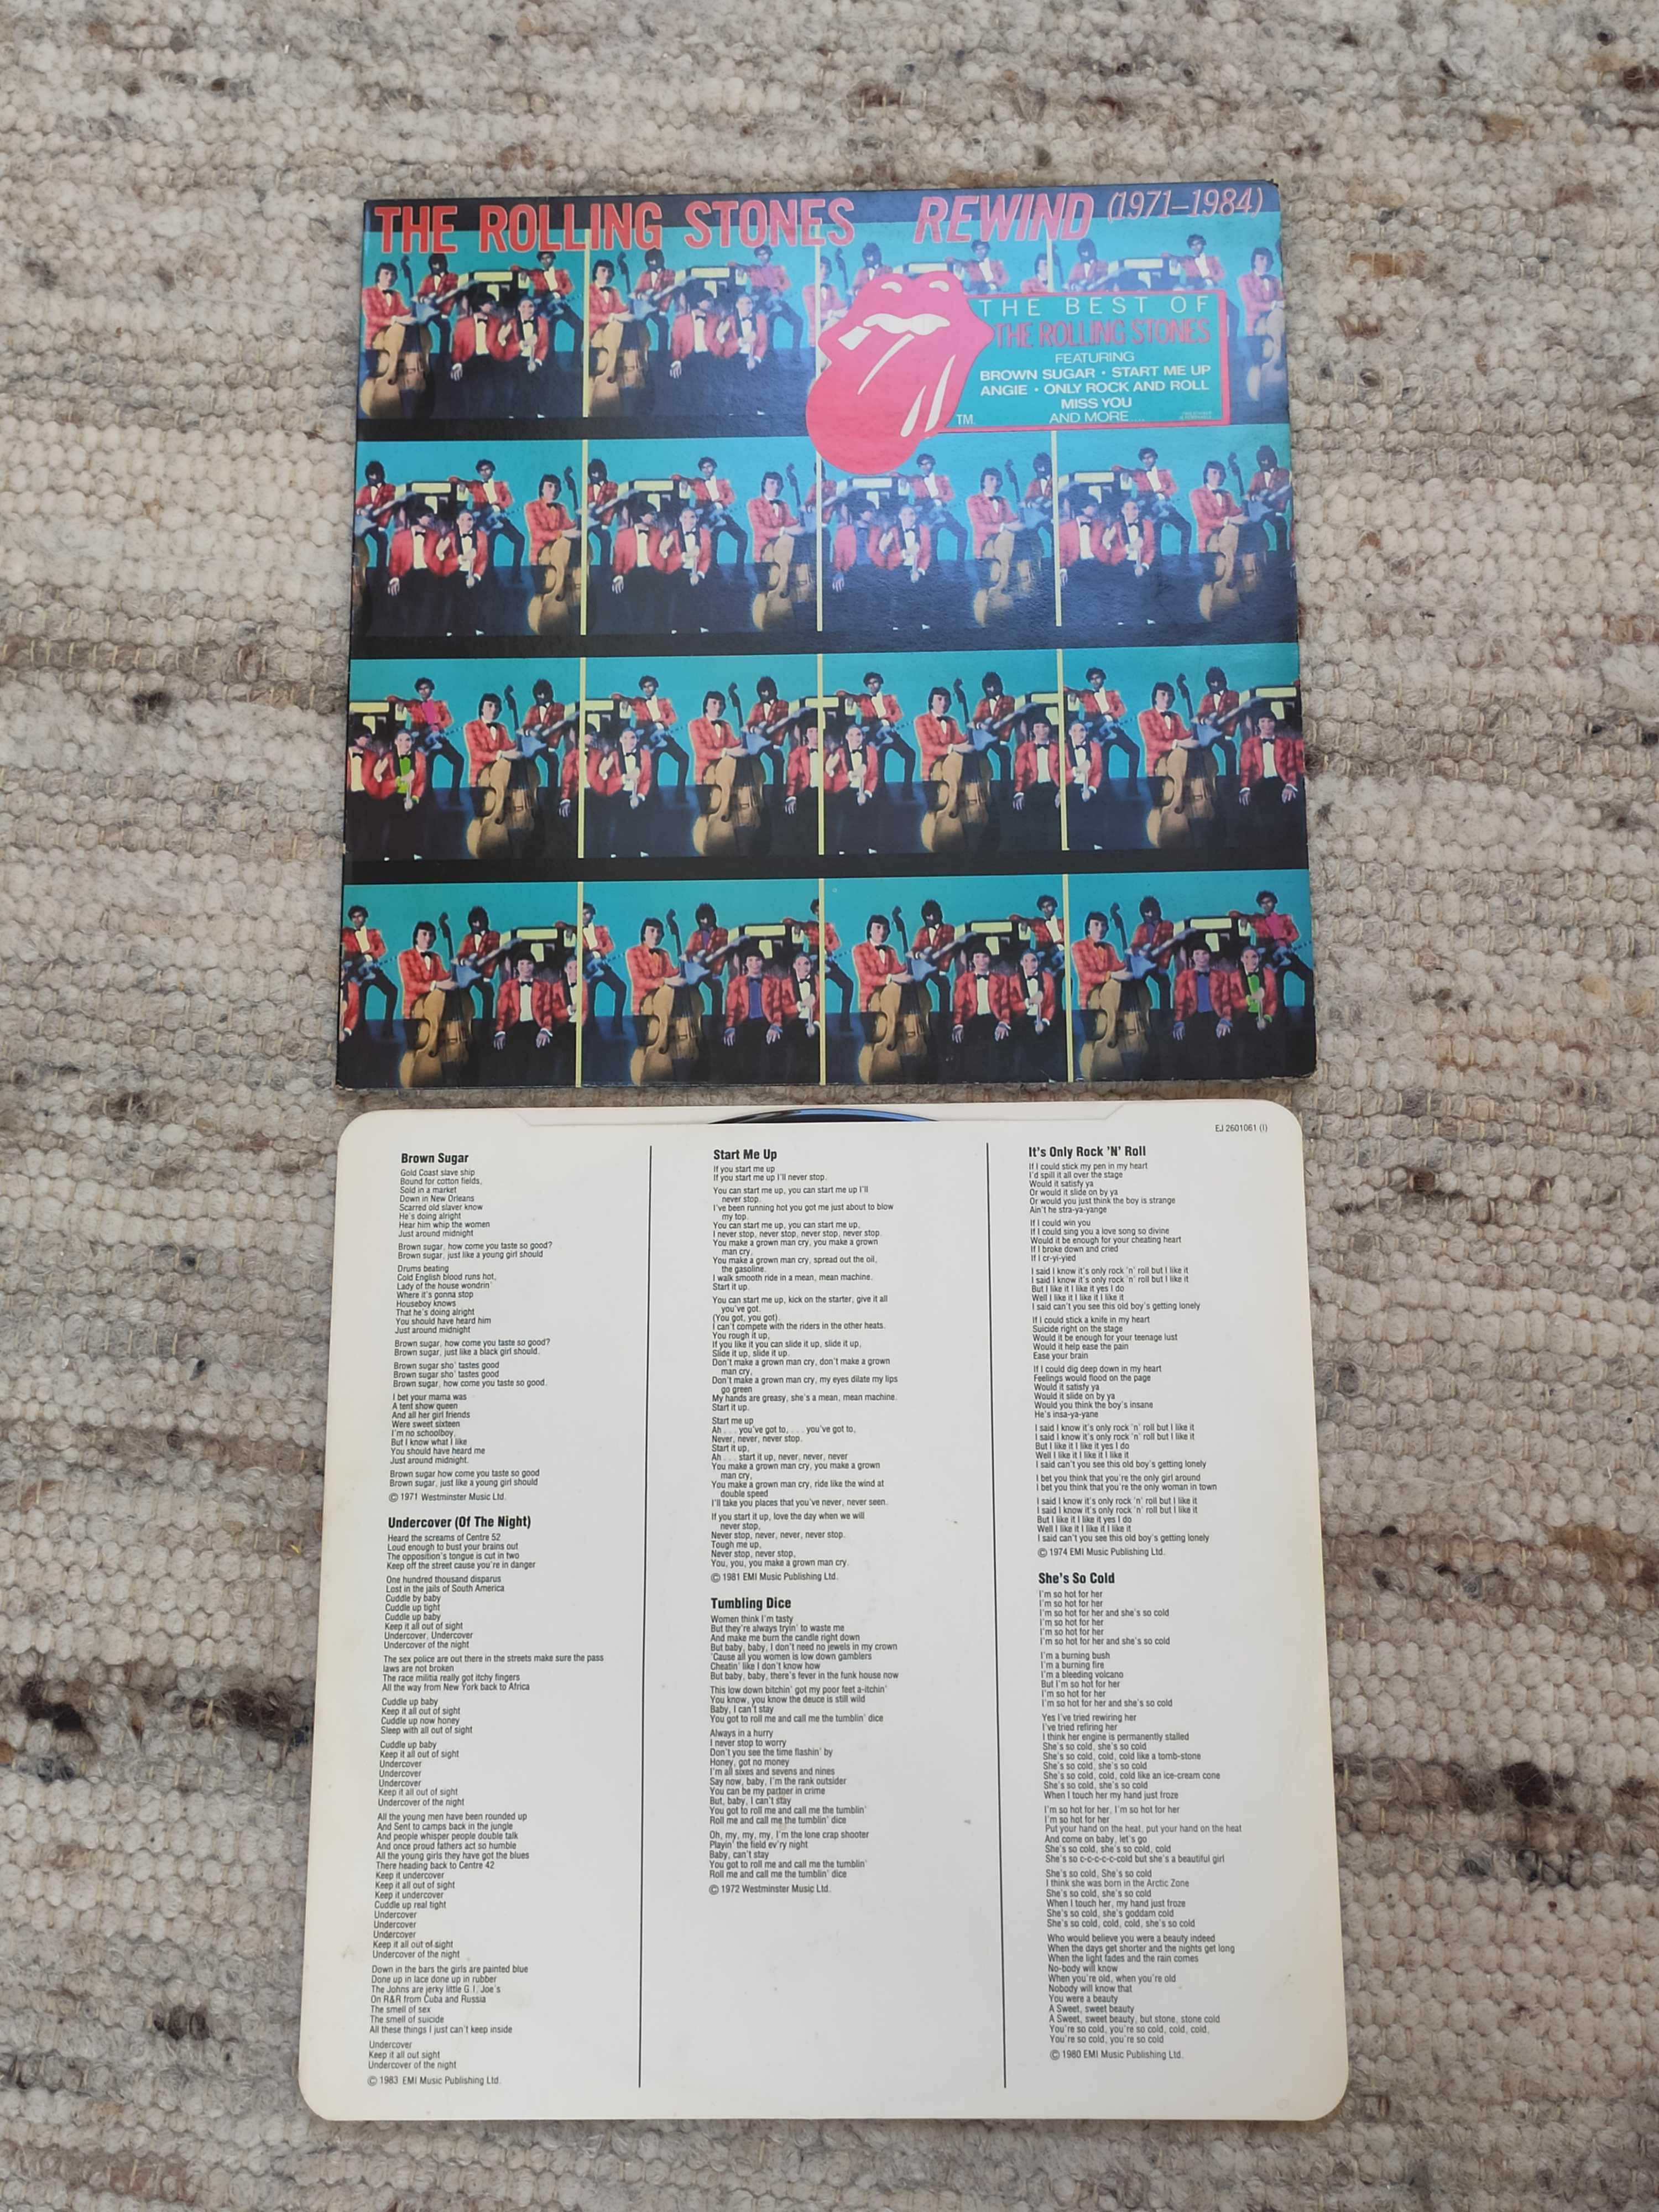 The Rolling Stones LP Rewind, 1. wyd. ang. 1984, winyl ANGIE